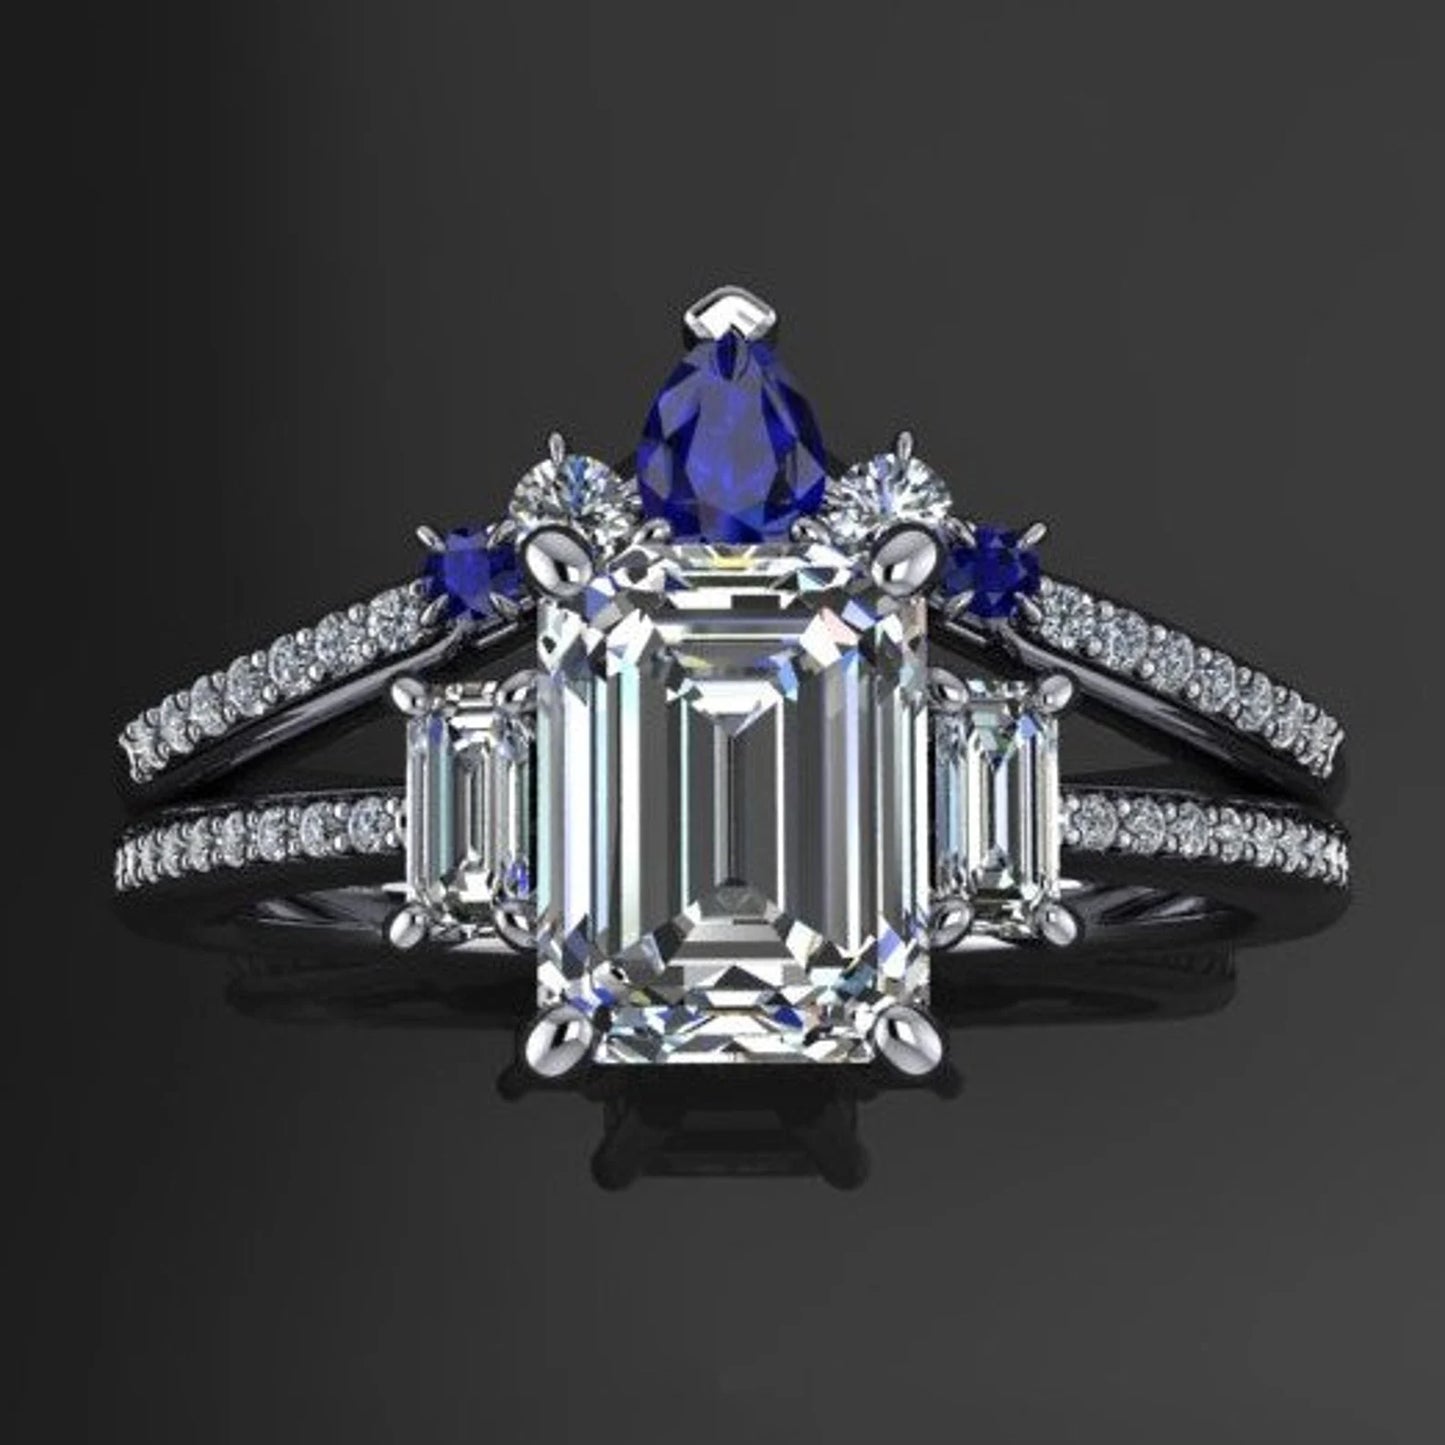 contoured moissanite and sapphire wedding band - J Hollywood Designs